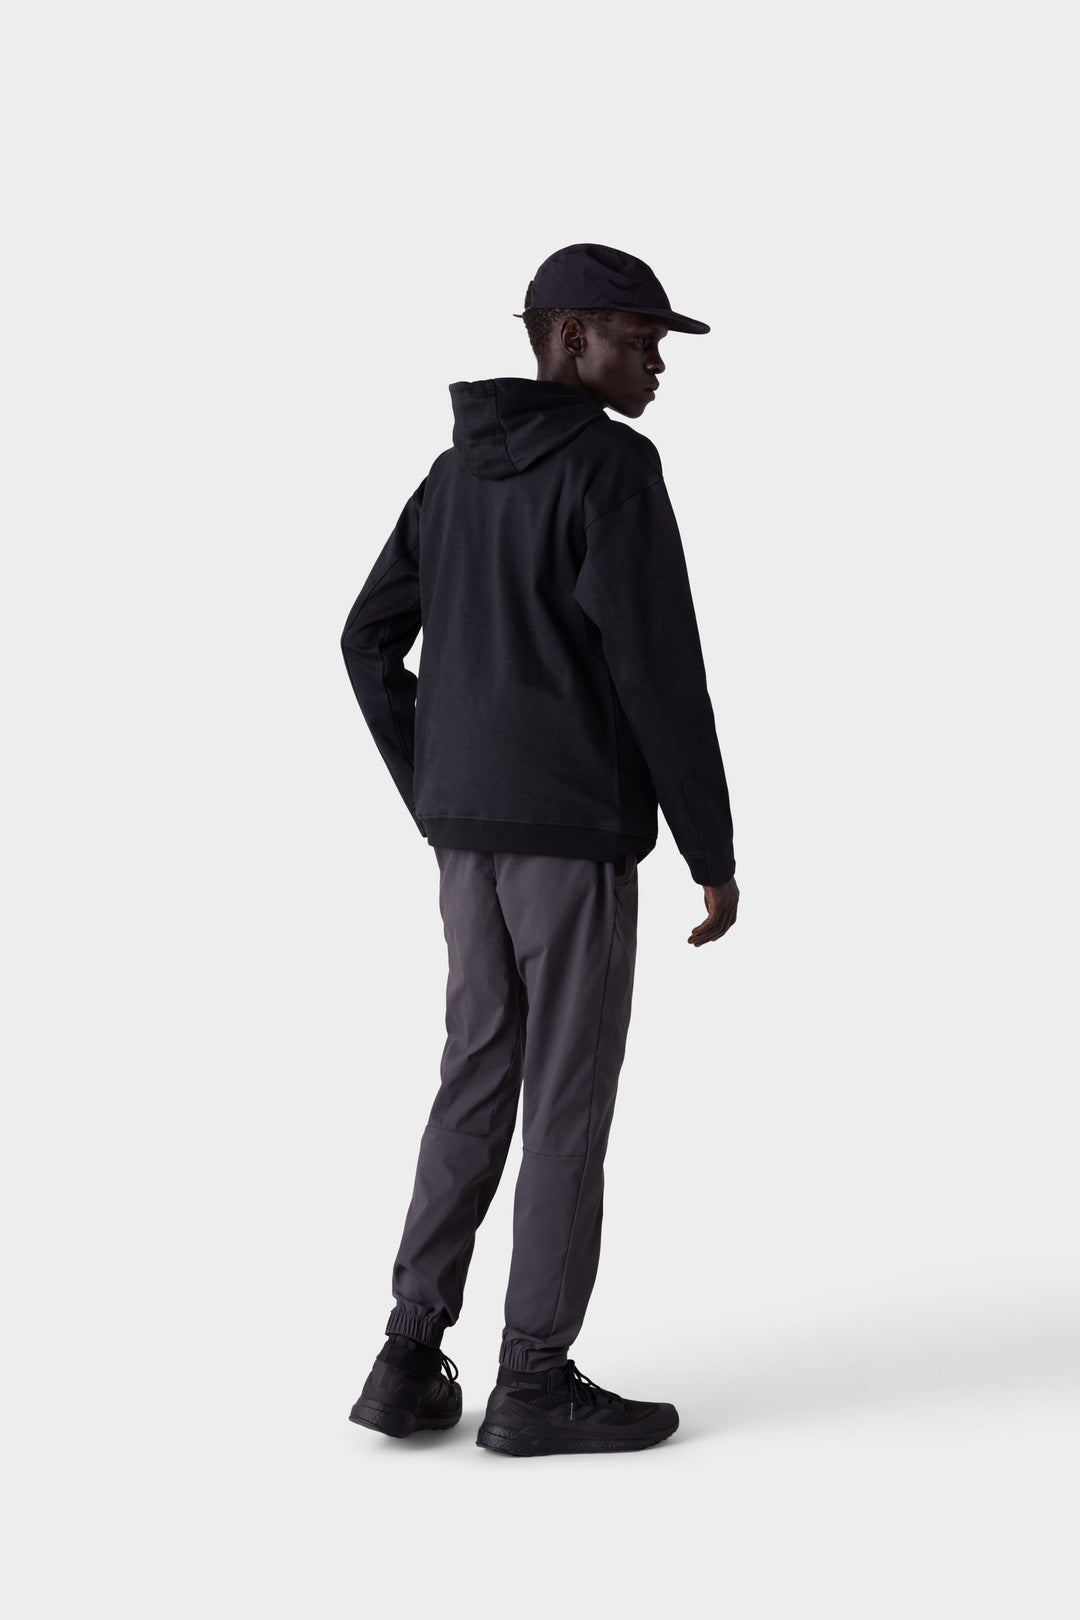 686 Everywhere Jogger Pant - Charcoal - Sun Diego Boardshop